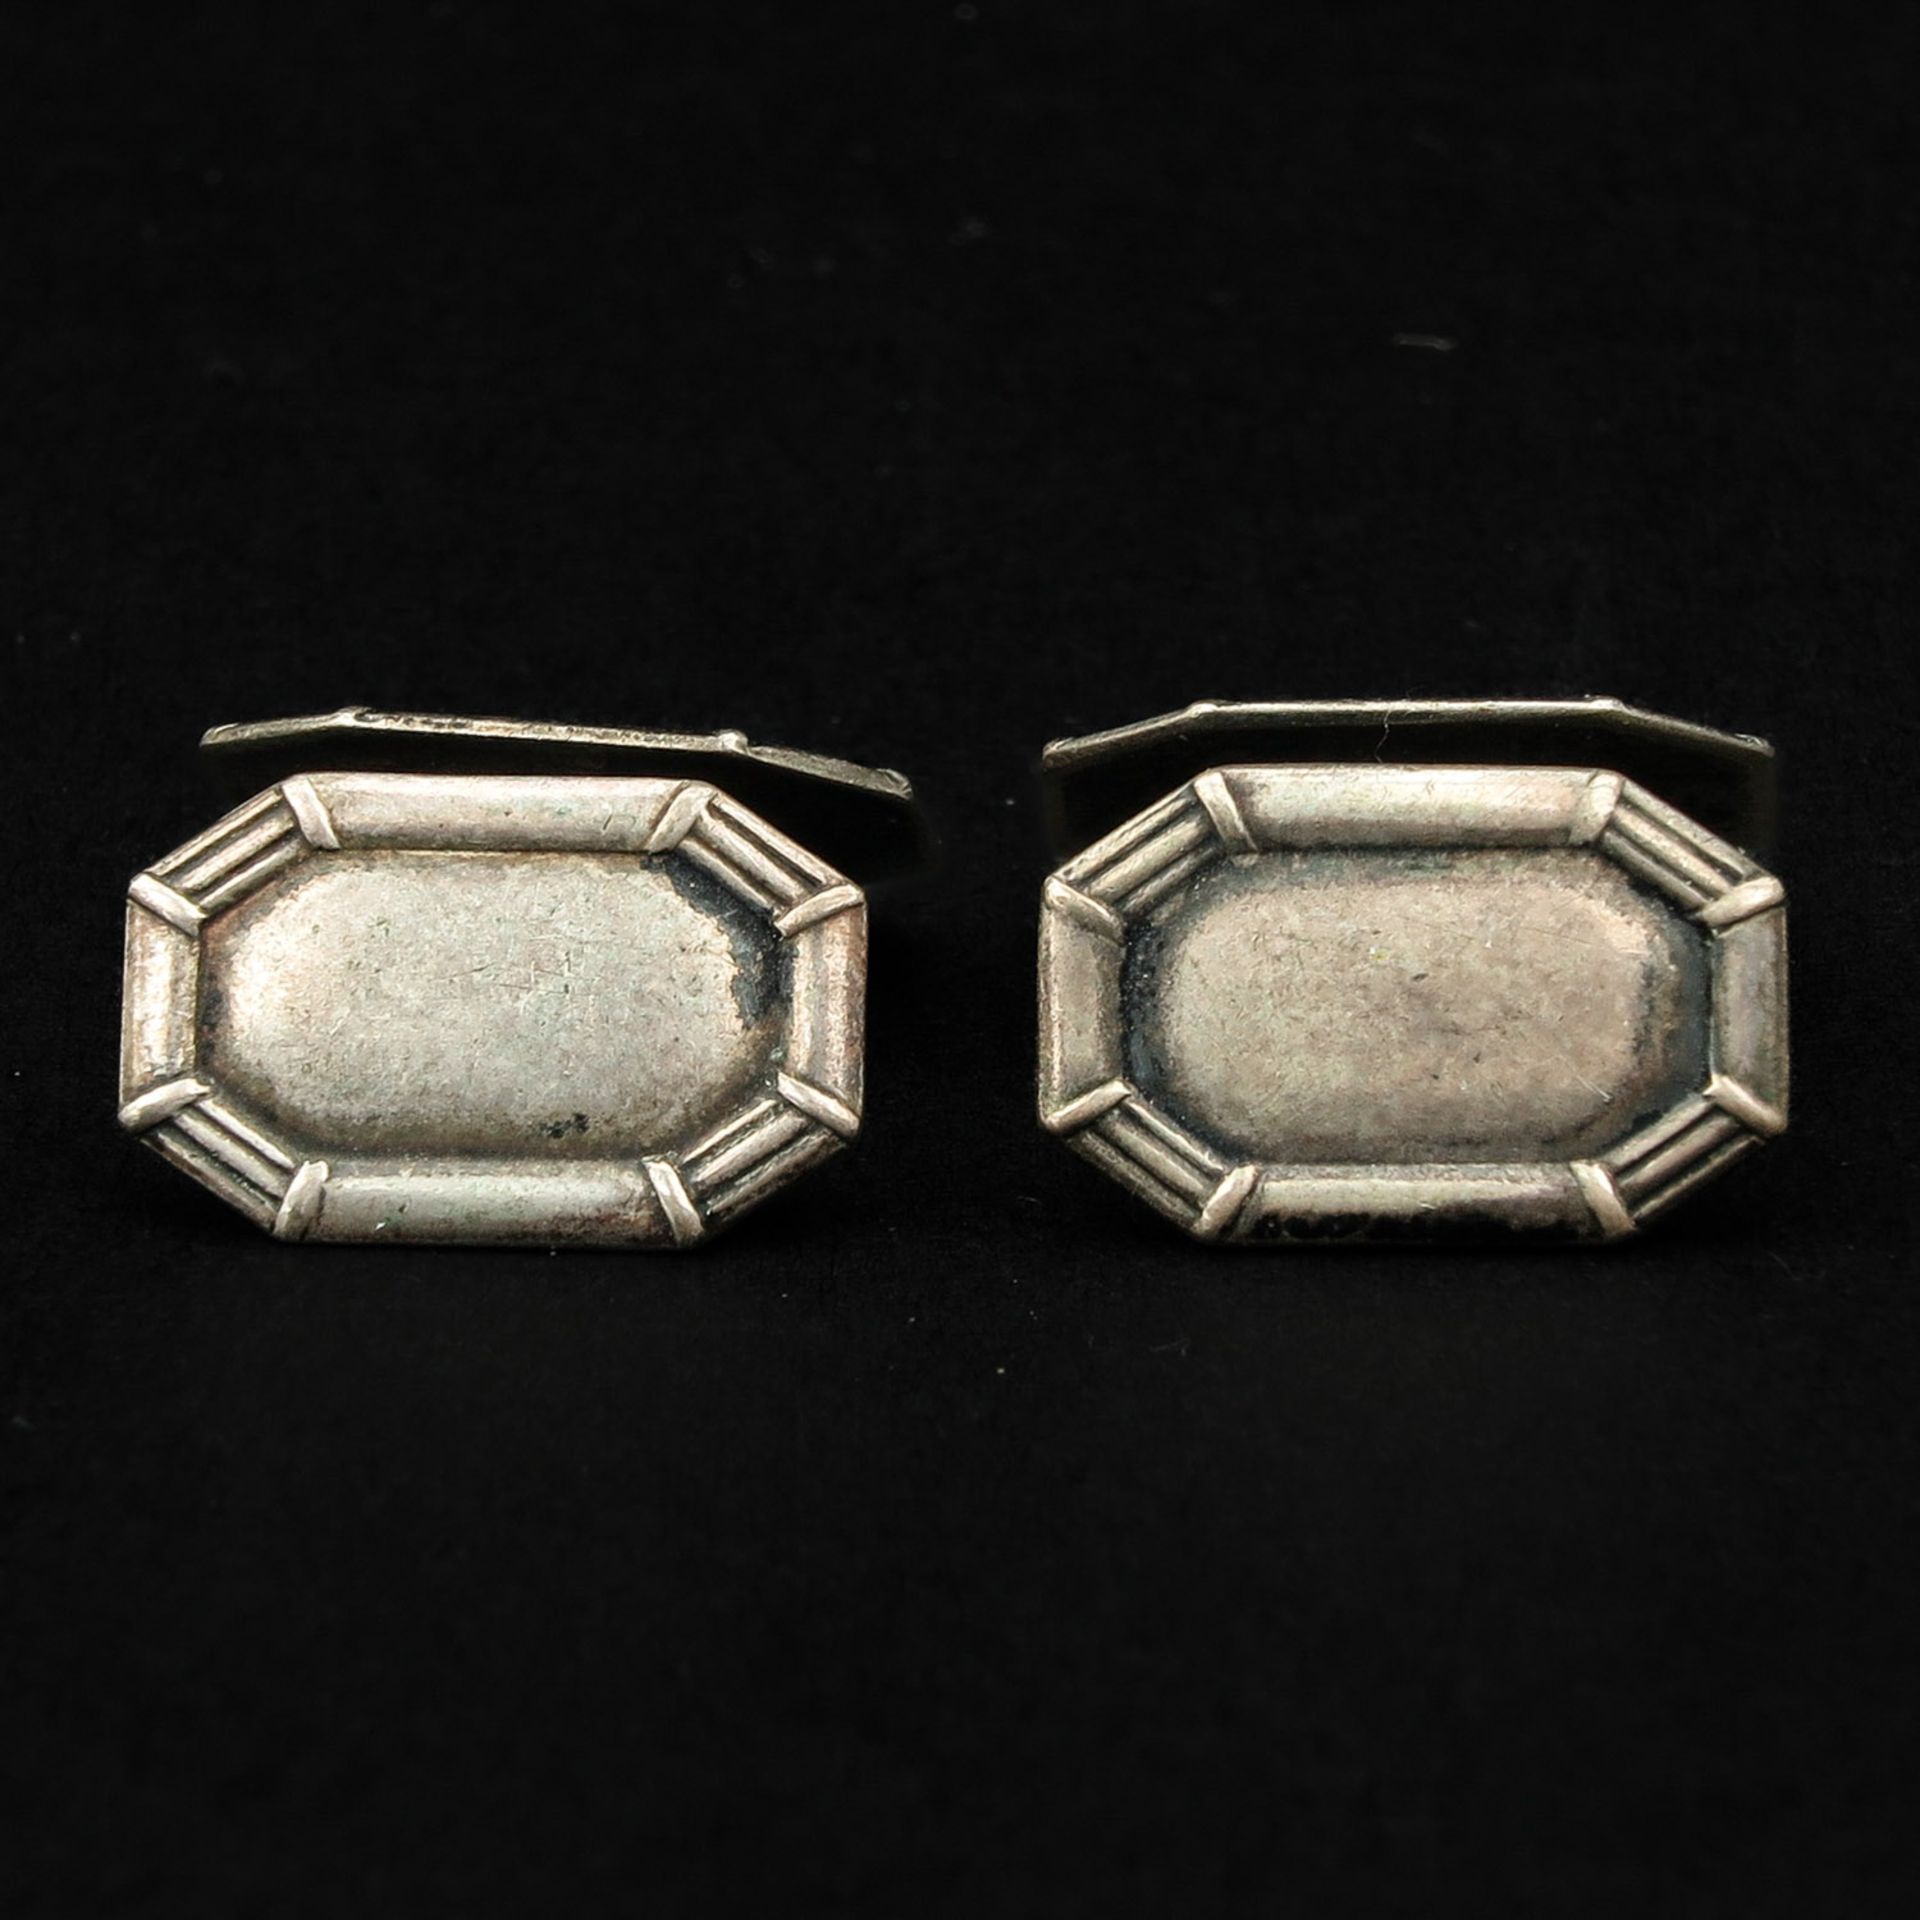 A Collection of Cuff Links - Image 7 of 9